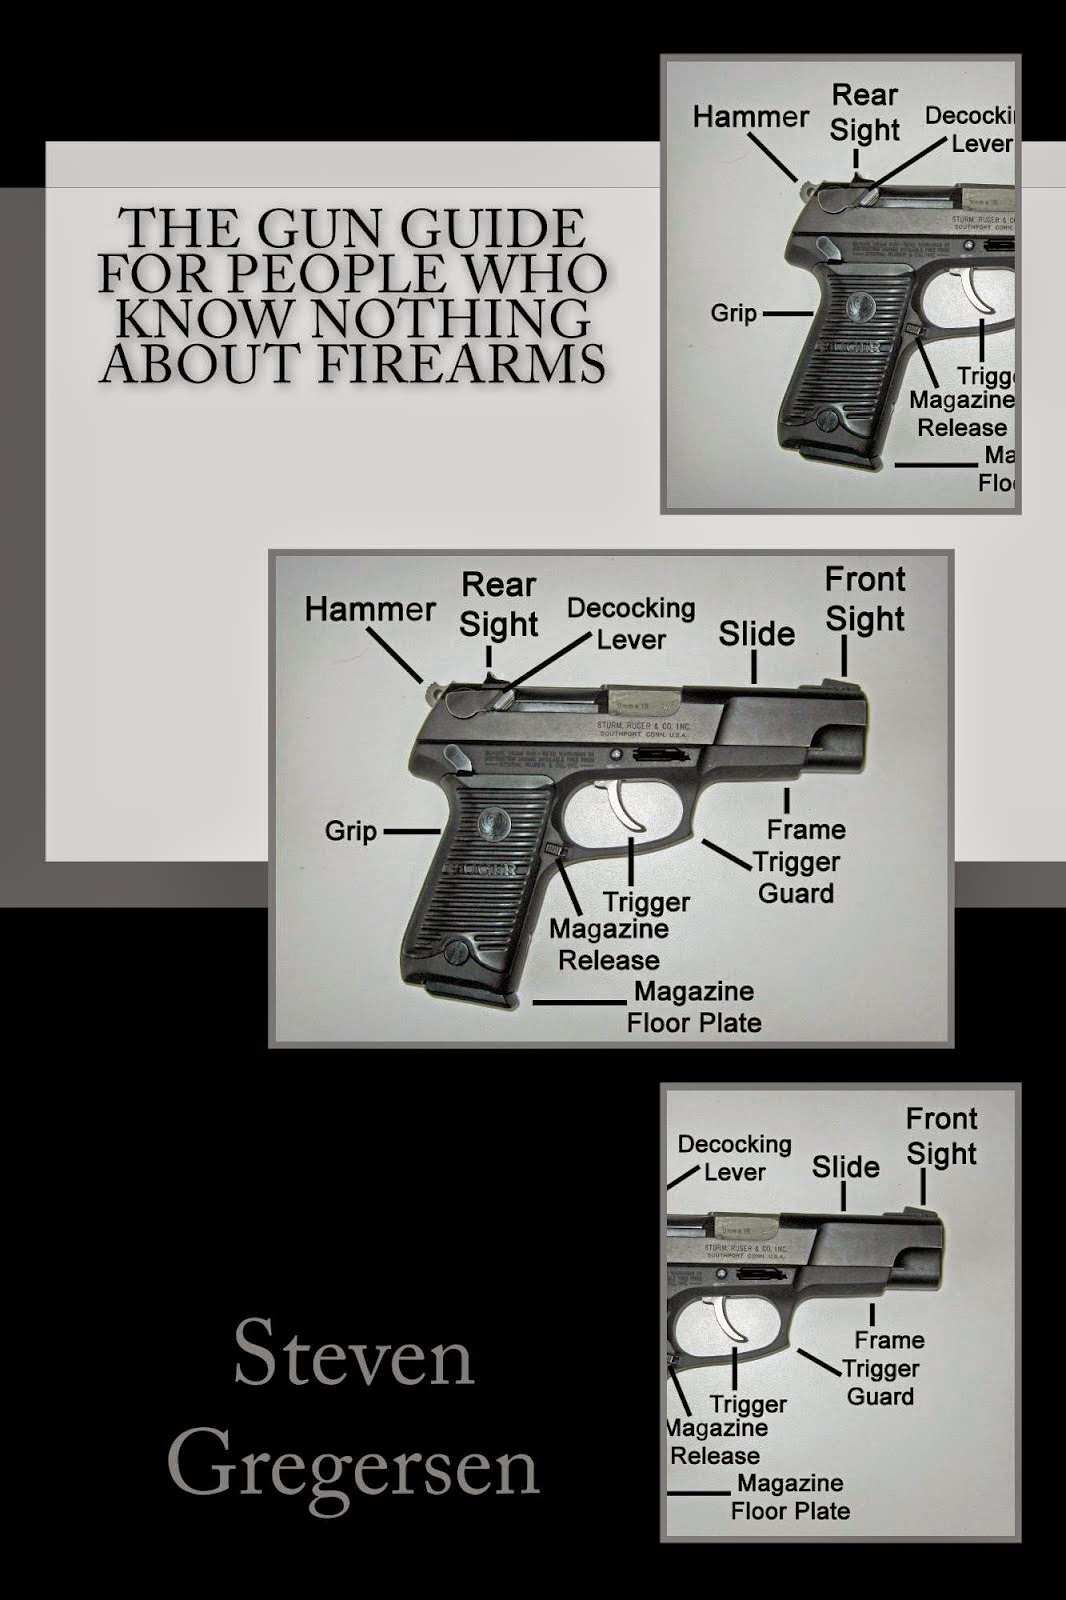 The Gun Guide for People Who Know Nothing About Firearms.